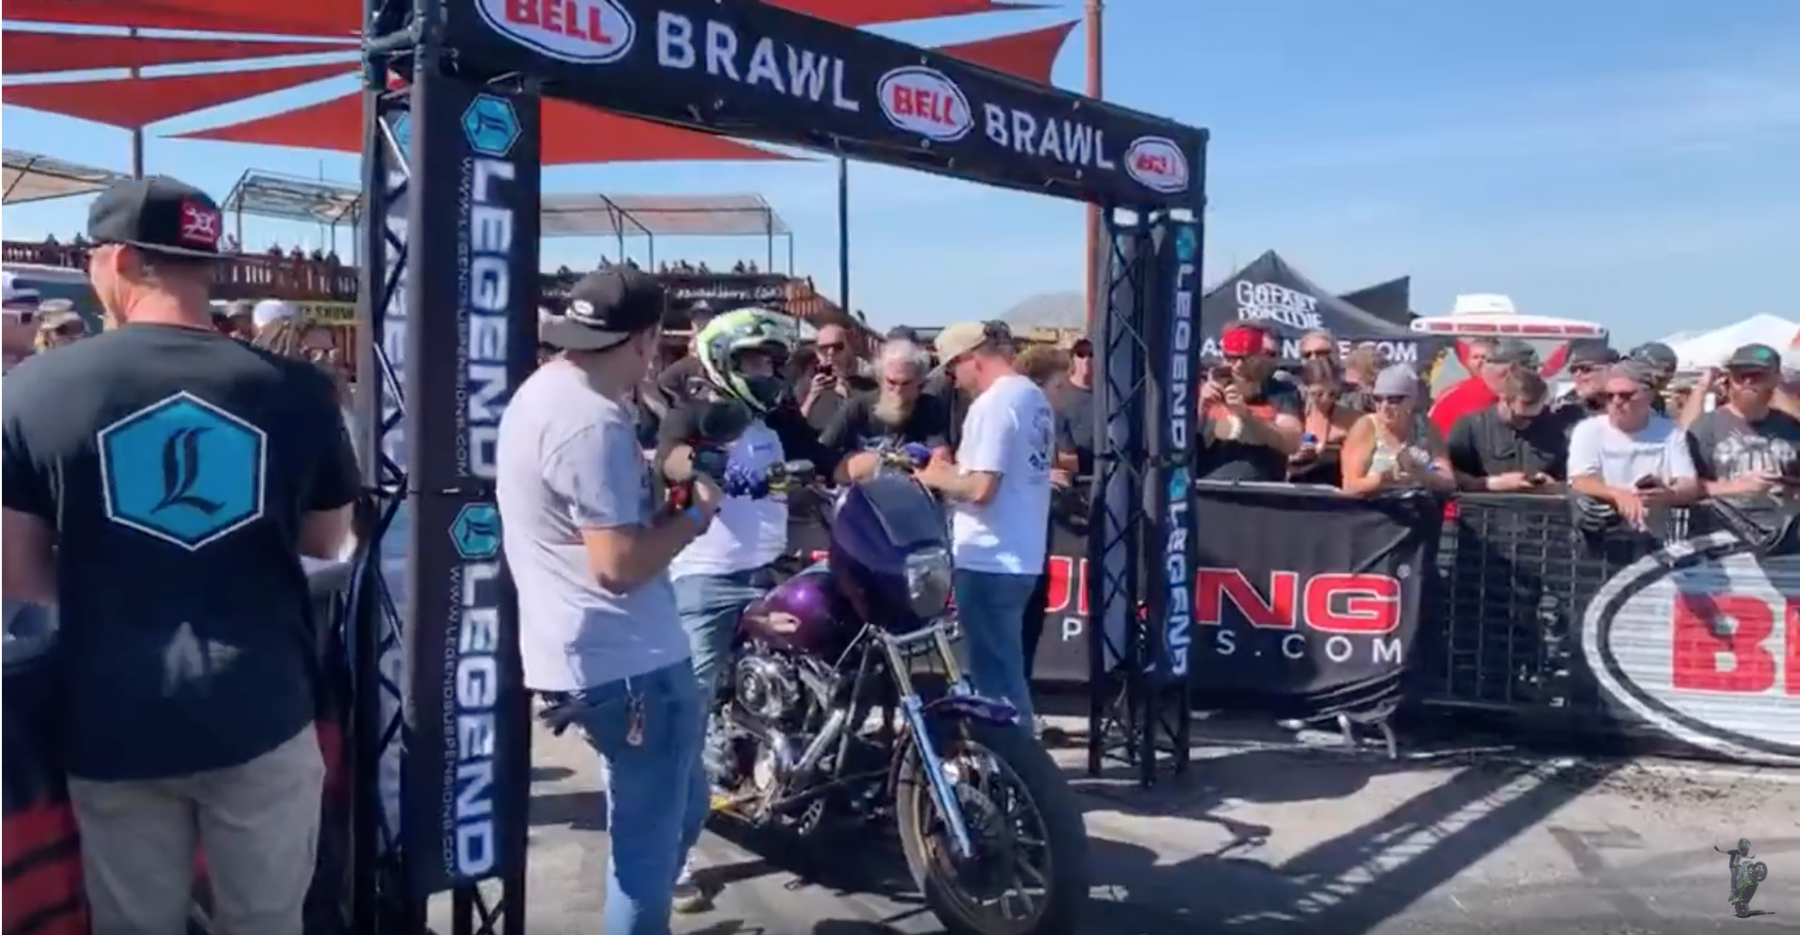 BELL BRAWL LIVE: Bell Powersports & Ride and Destroy’s “Brawl at the Buffalo” @Sturgis 2019